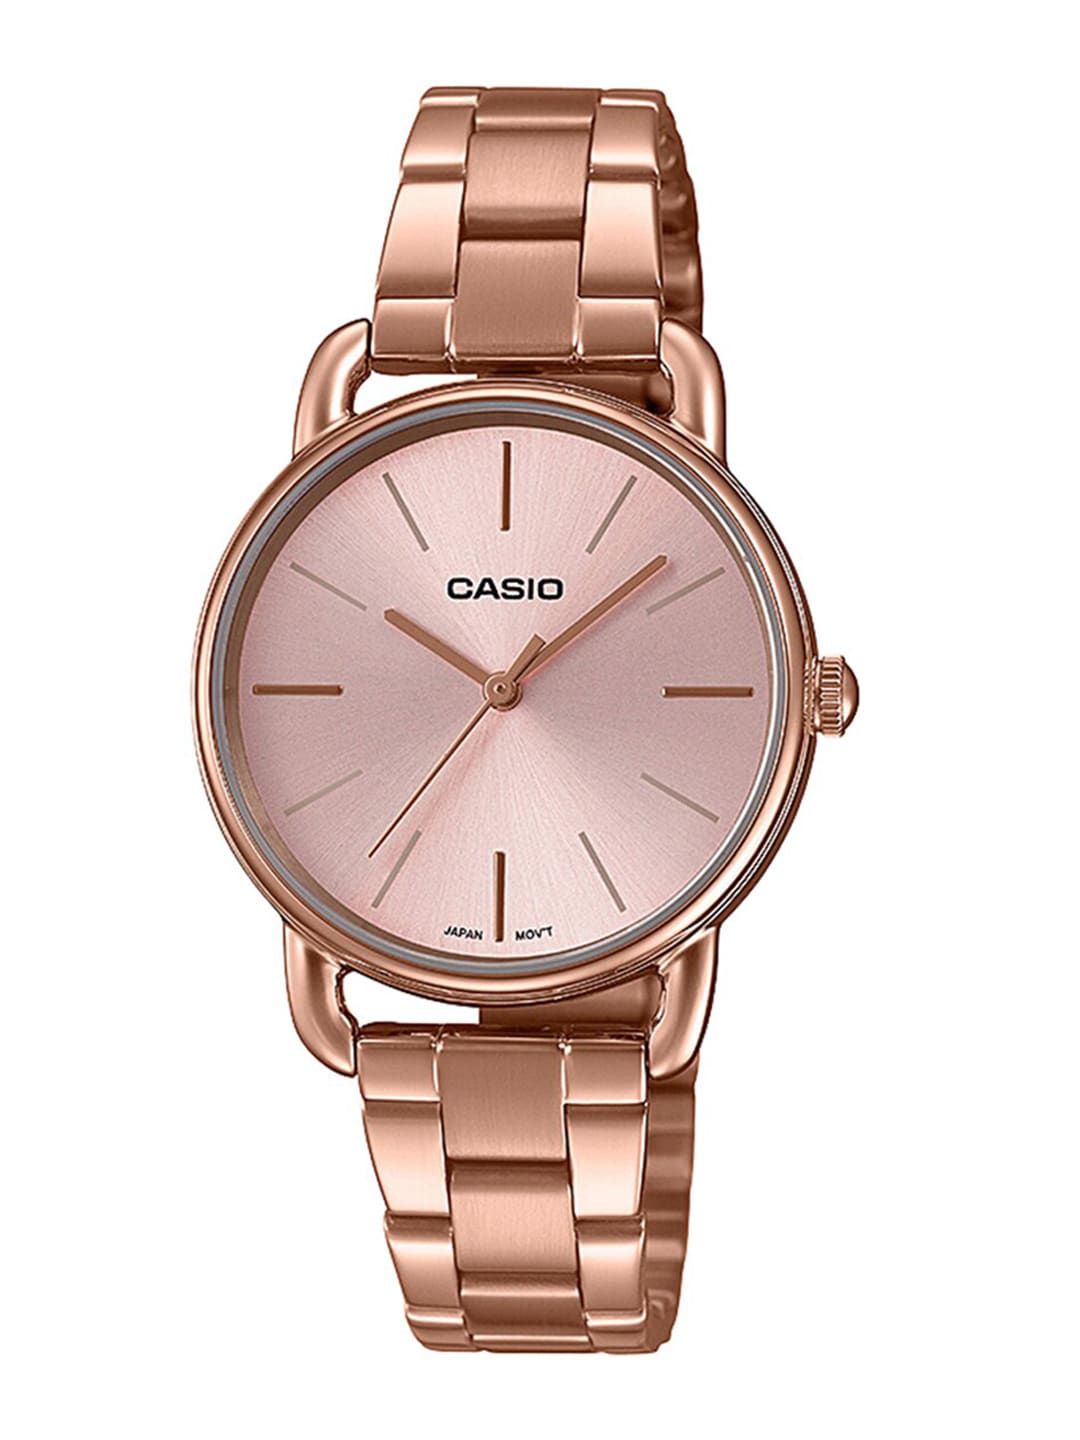 CASIO Enticer Ladies Rose Gold Analogue Watch A1795 Price in India